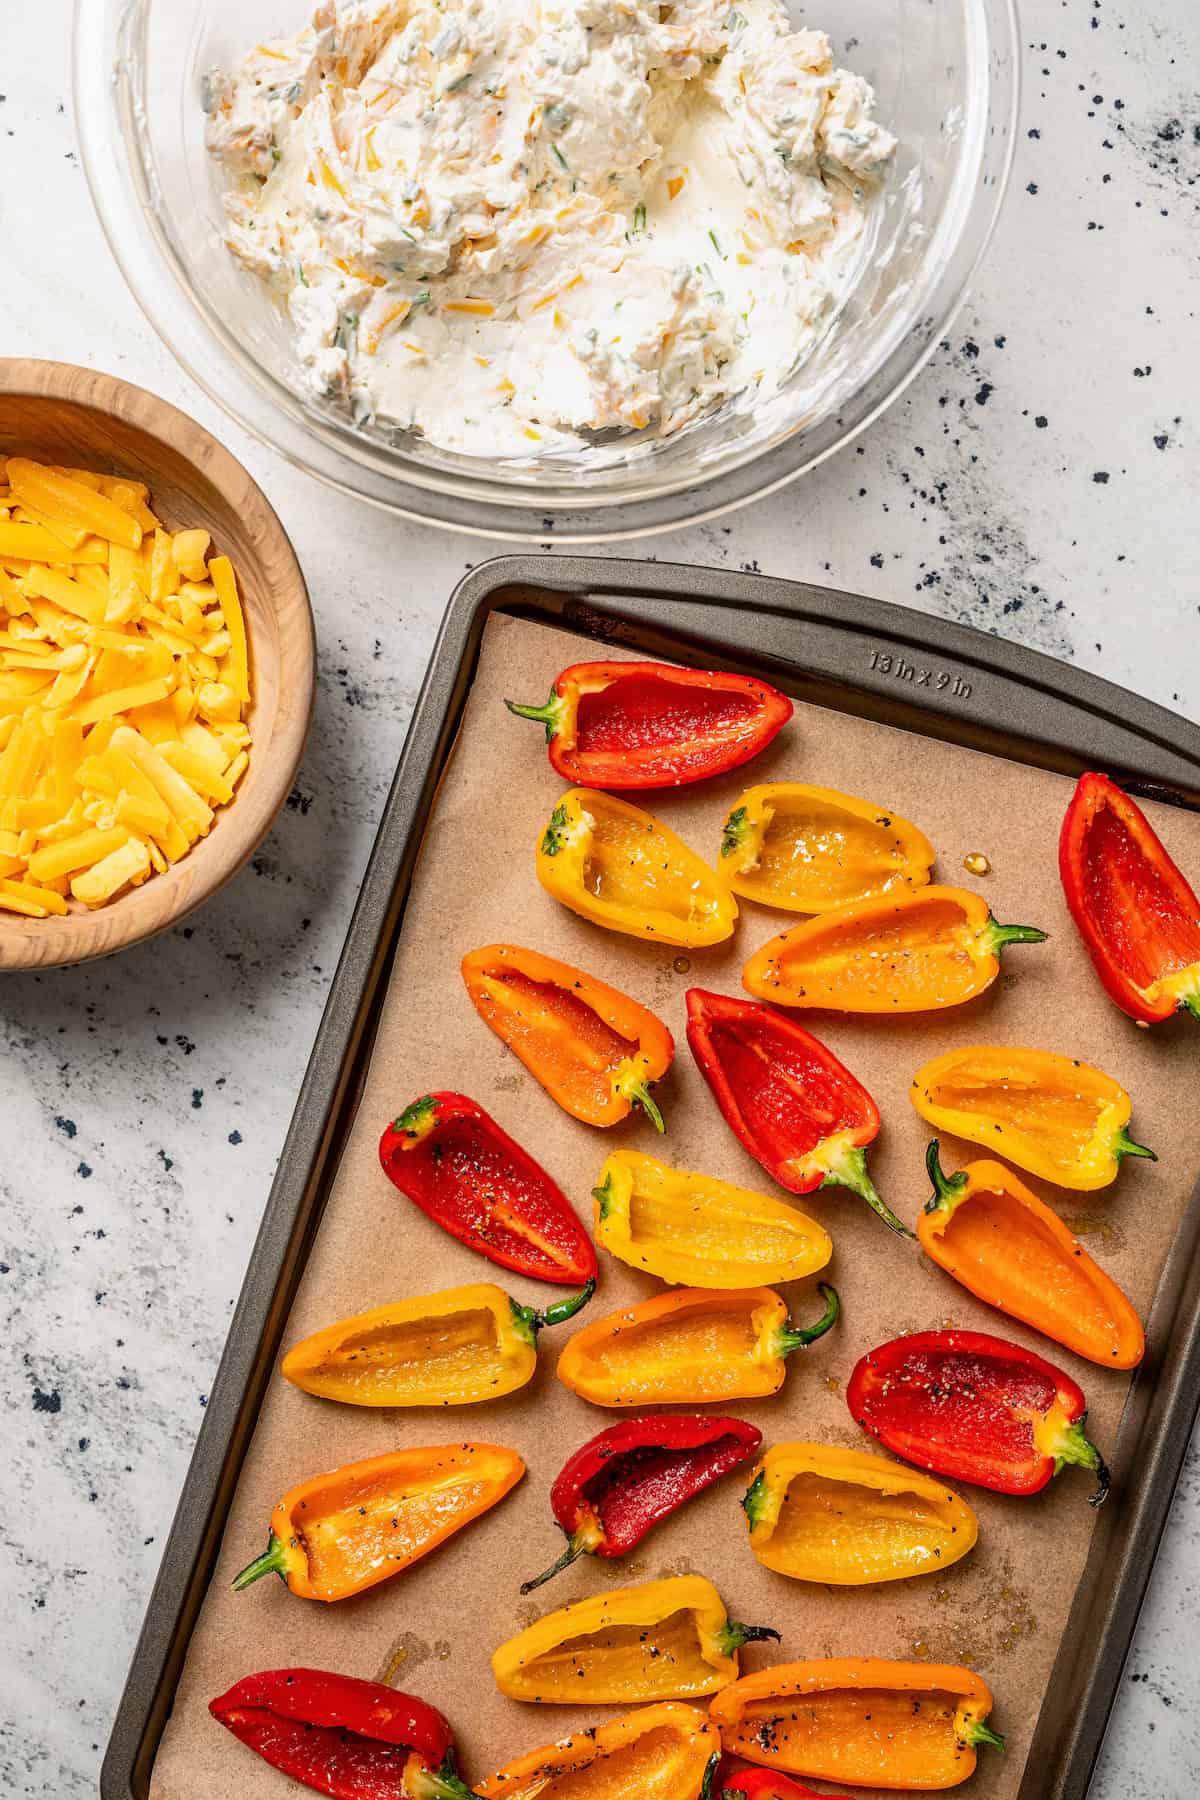 Par-baked bell pepper halves on a lined baking sheet, next to bowls of cream cheese filling and shredded cheddar cheese.